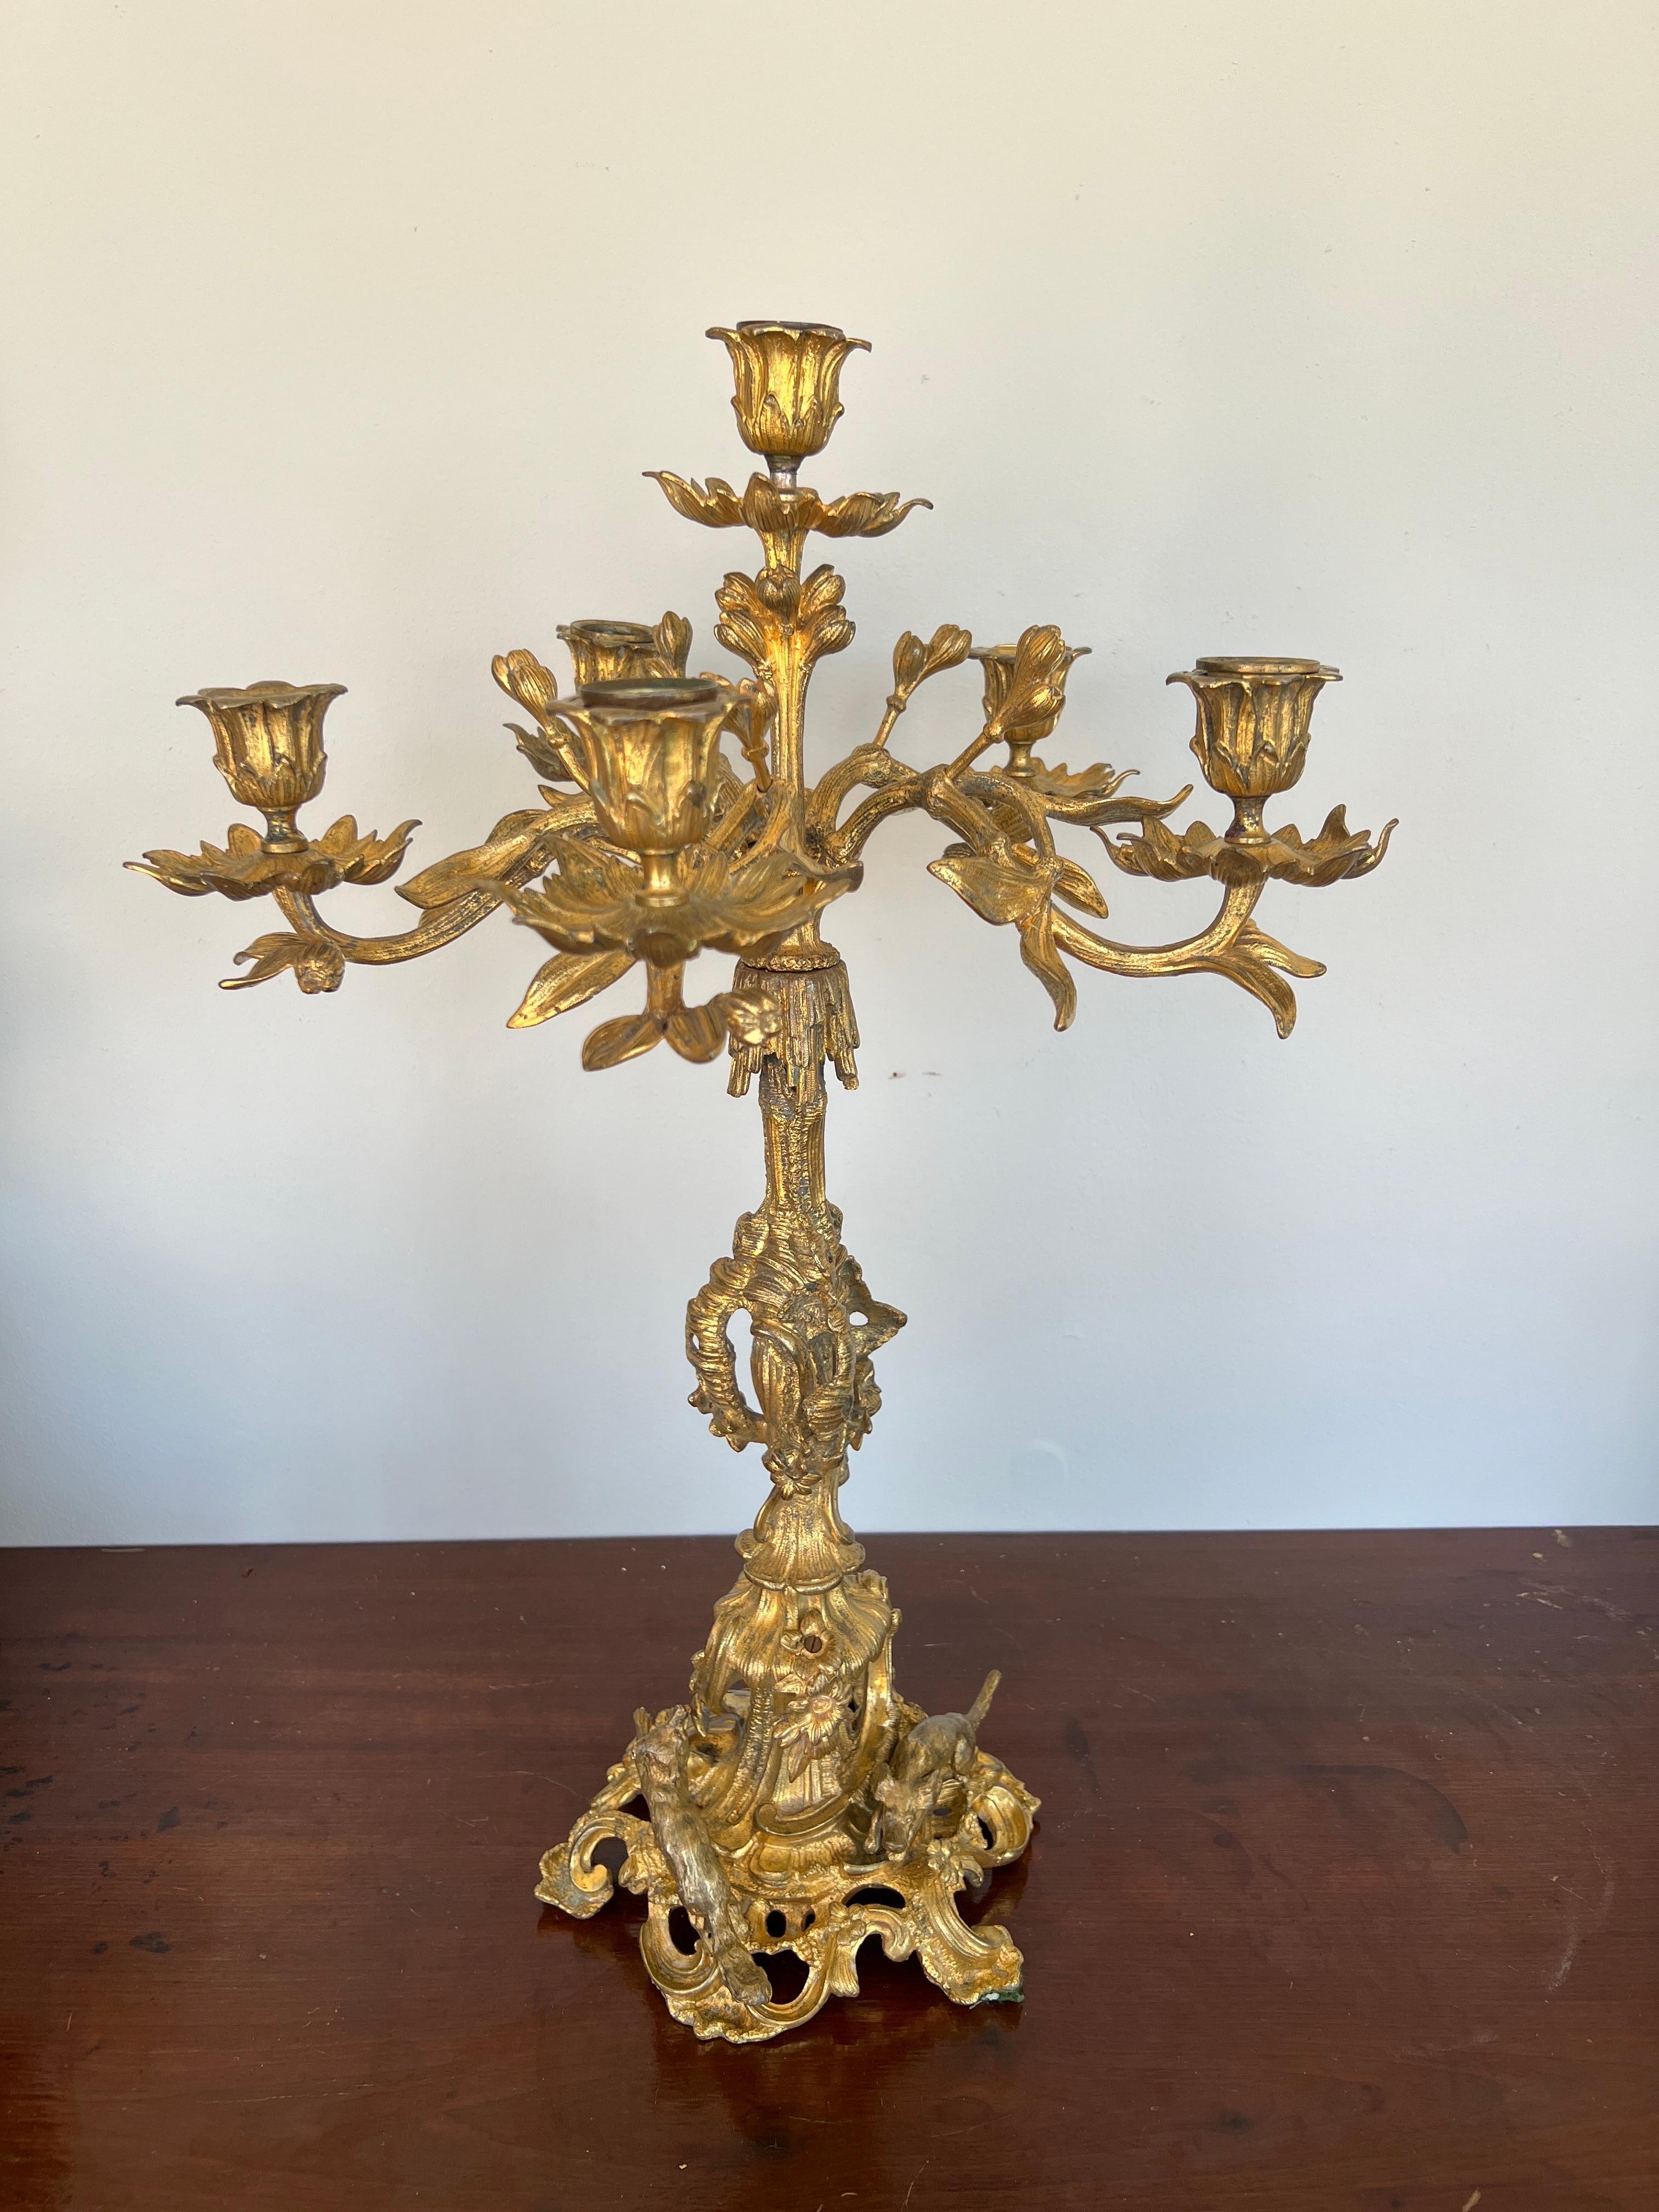 French, late 19th century. Good Quality

Behold the epitome of grandeur and sophistication: a truly magnificent Large Scale Gilt Bronze 6-Light Candelabra, resplendent with an enchanting Fox & Dog Hunting Scene. This opulent masterpiece commands